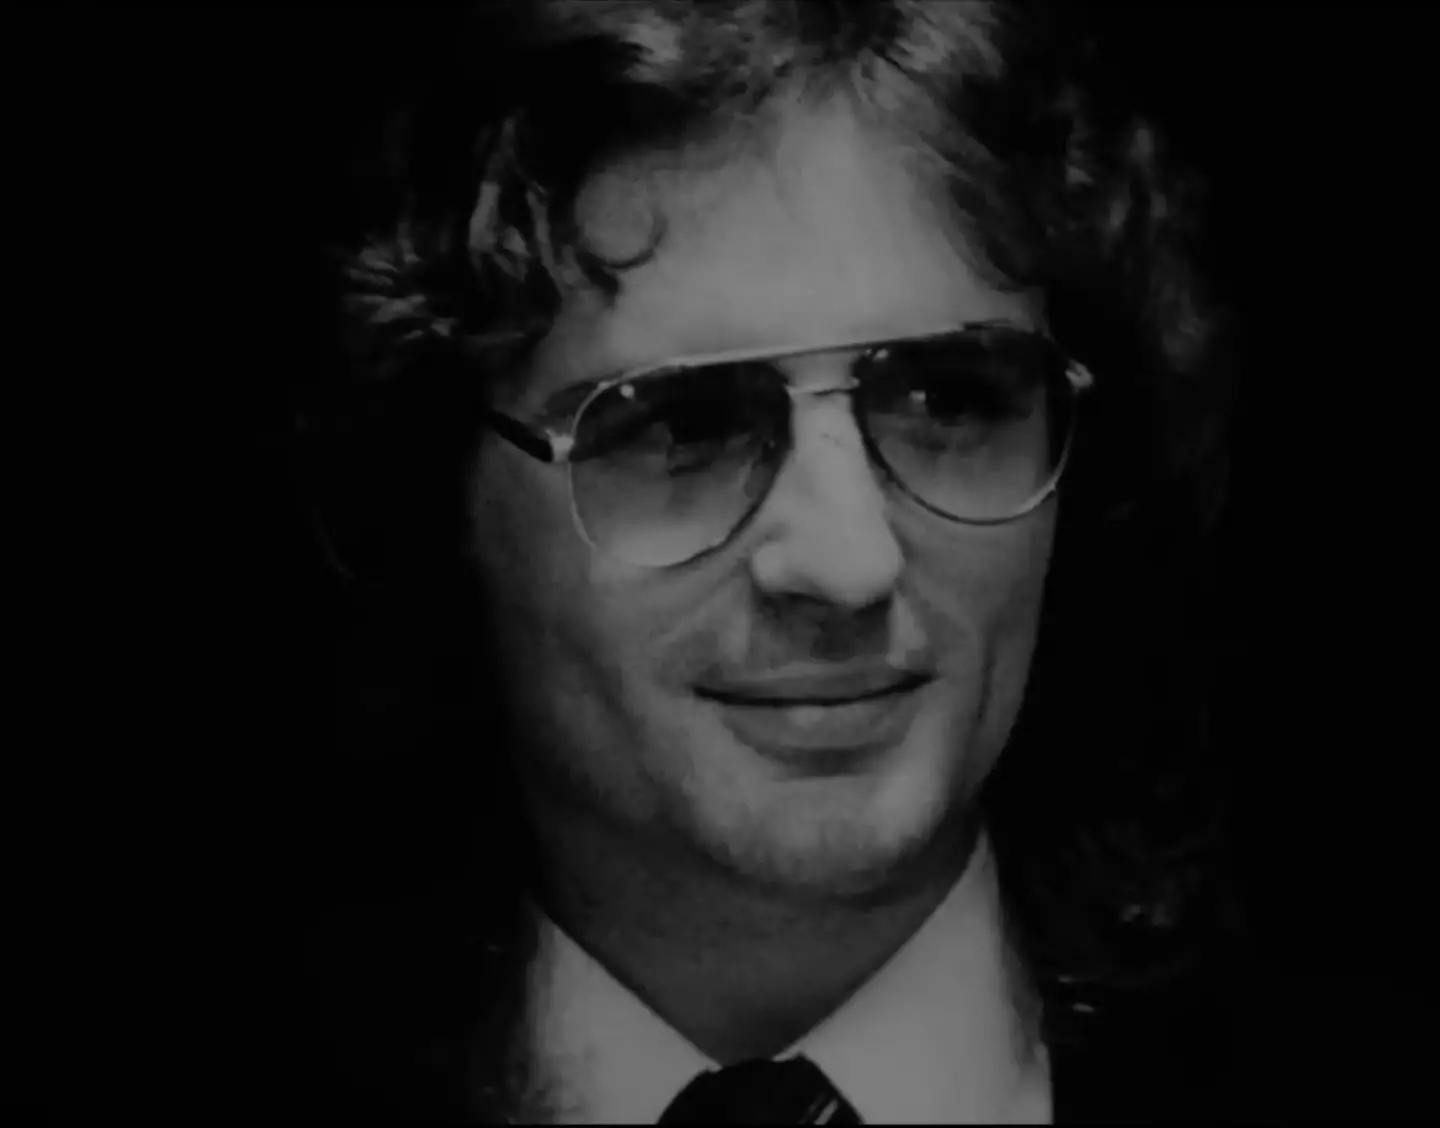 David Koresh quickly rose through the Branch Davidians to lead.